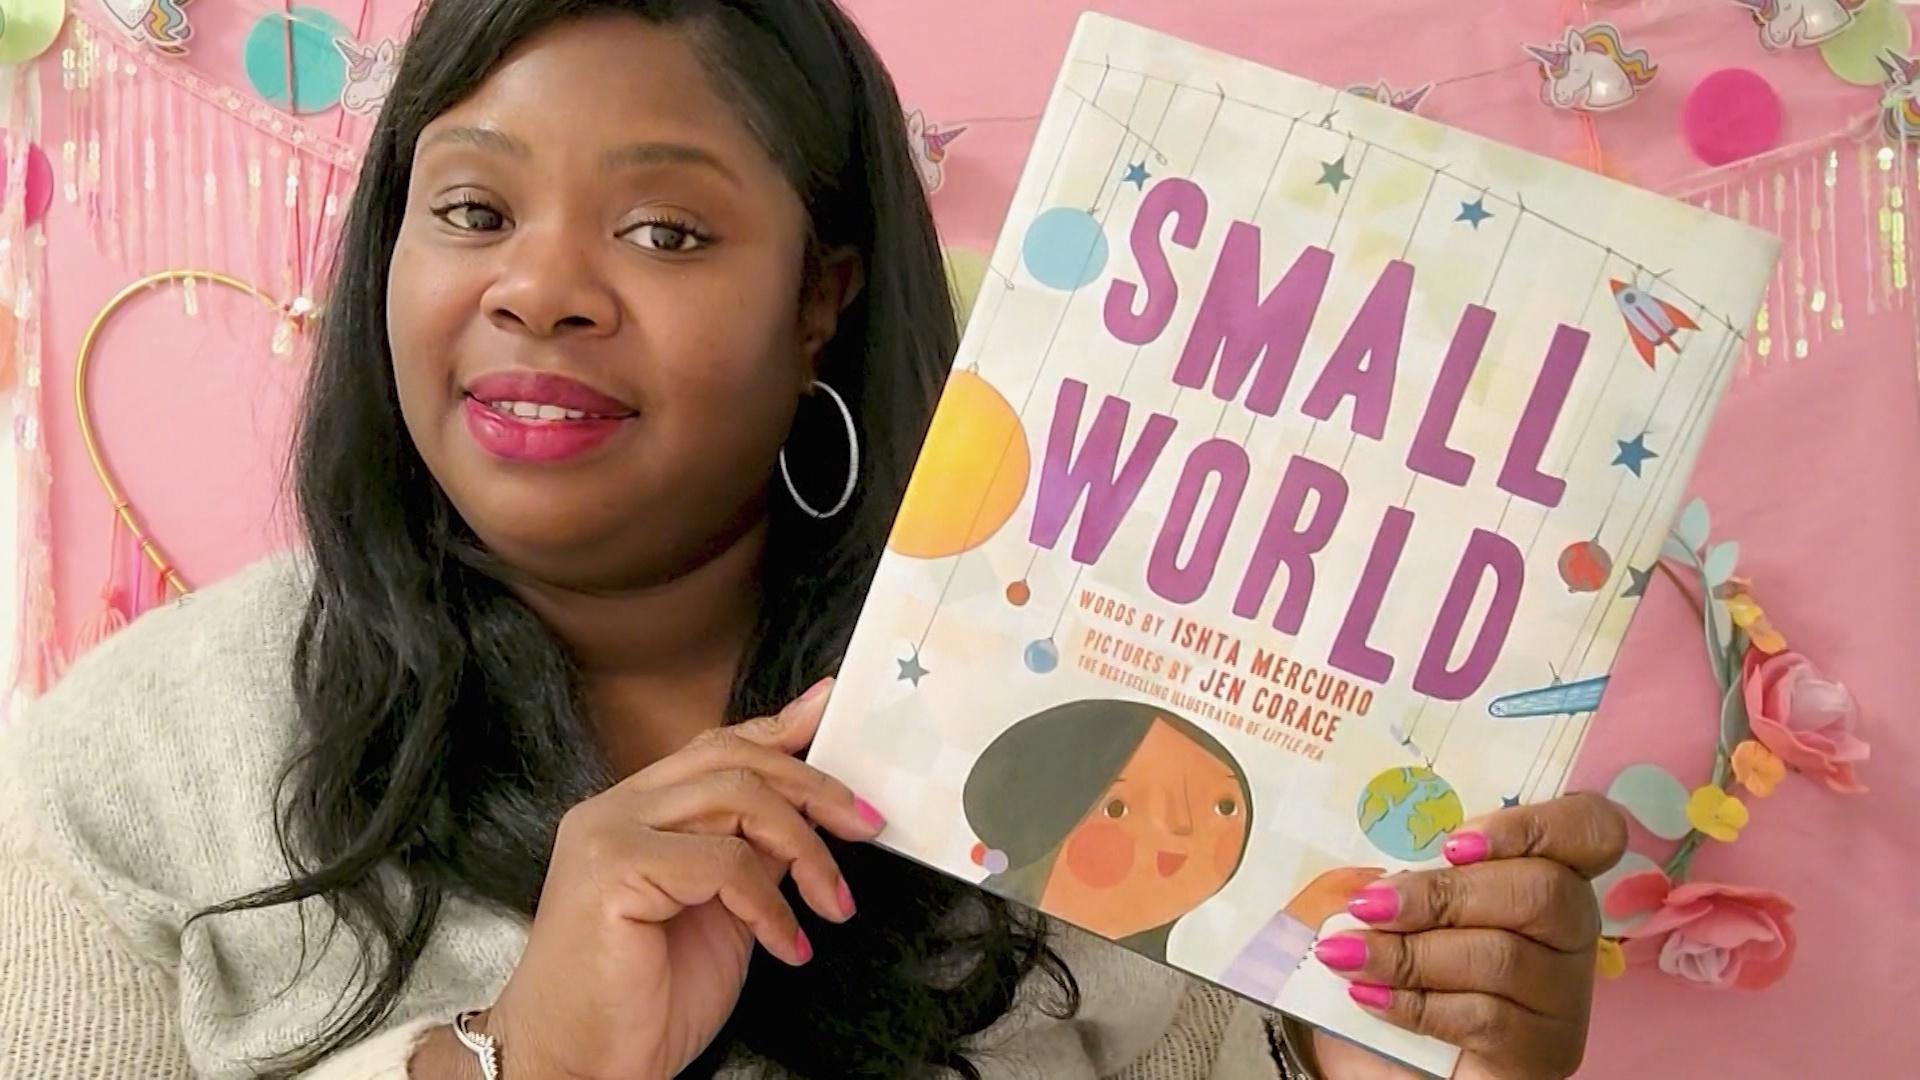 A black woman holding up a book titled "Small World."